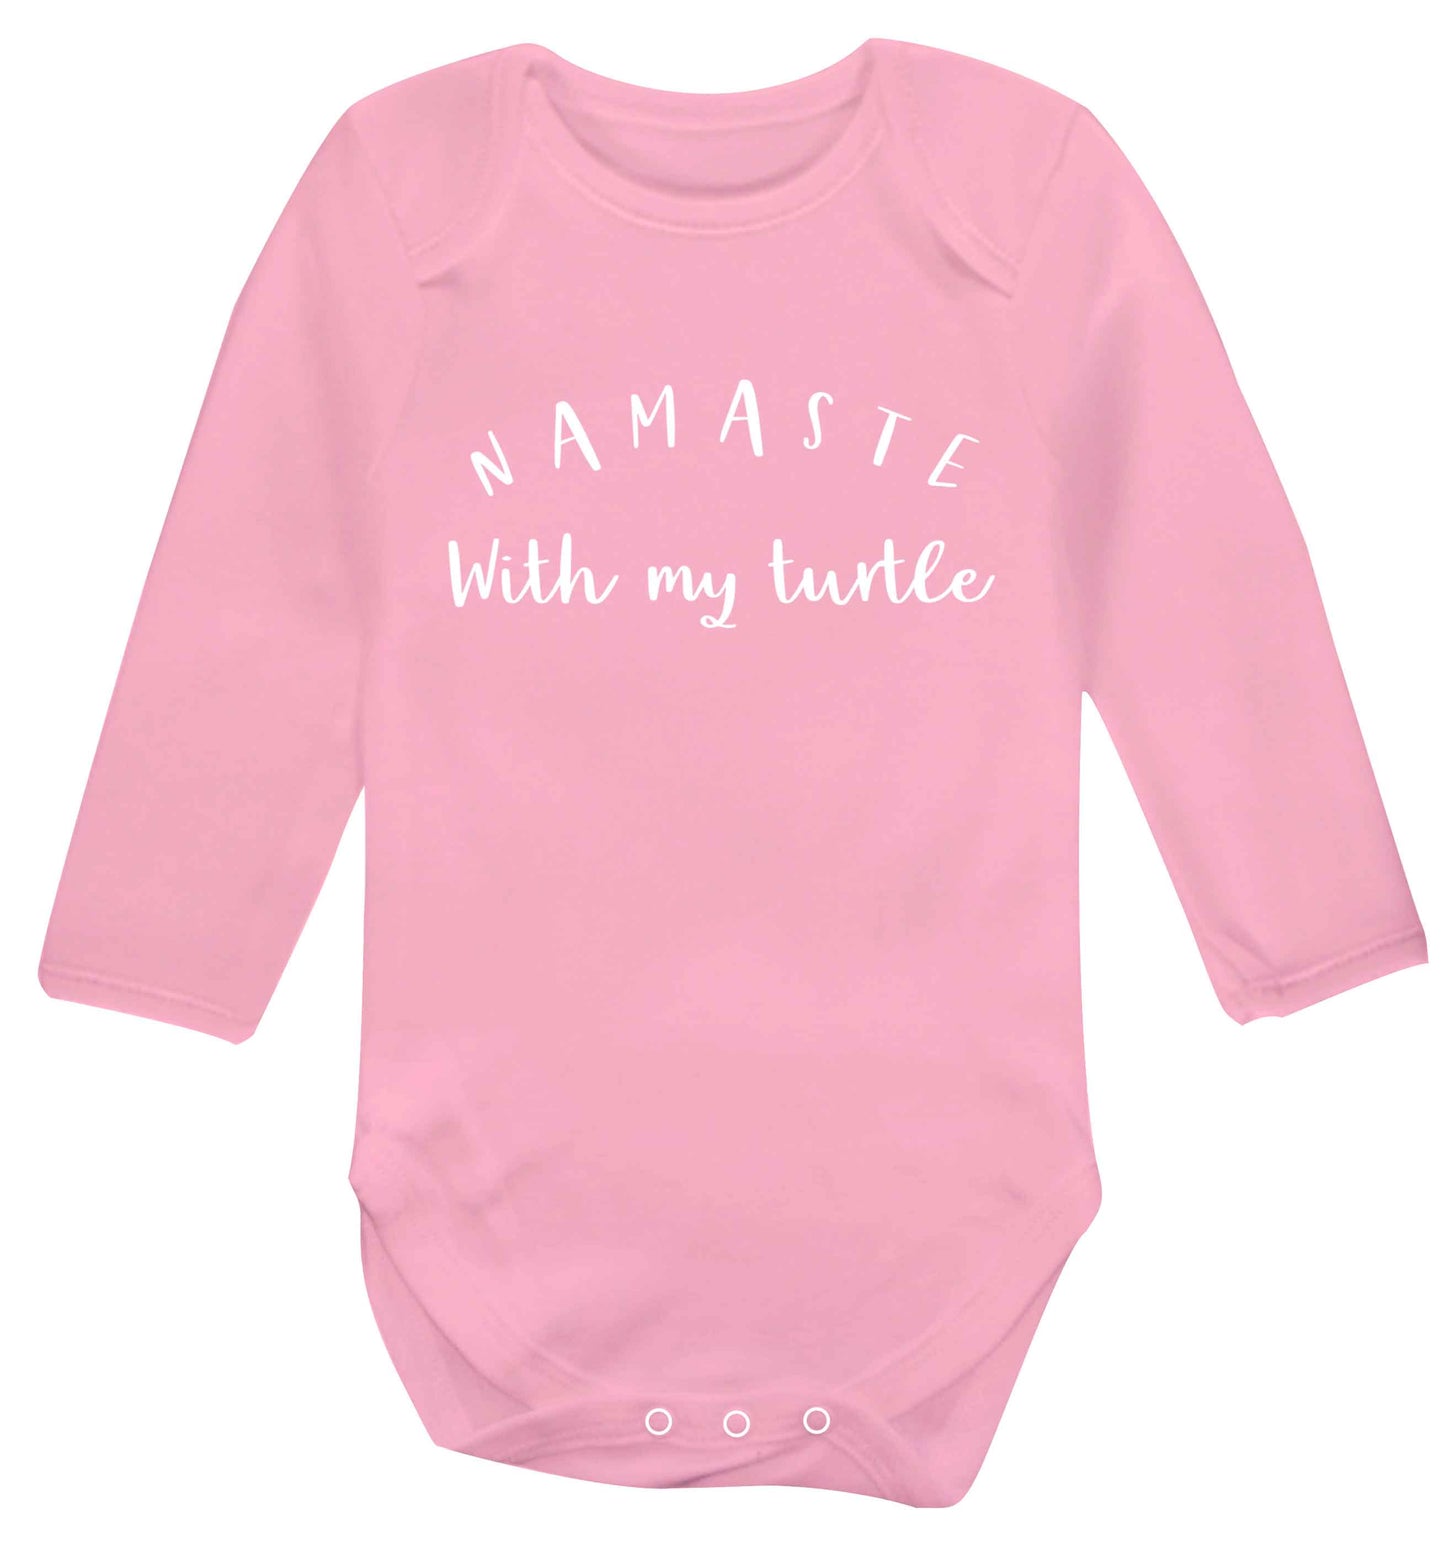 Namaste with my turtle Baby Vest long sleeved pale pink 6-12 months